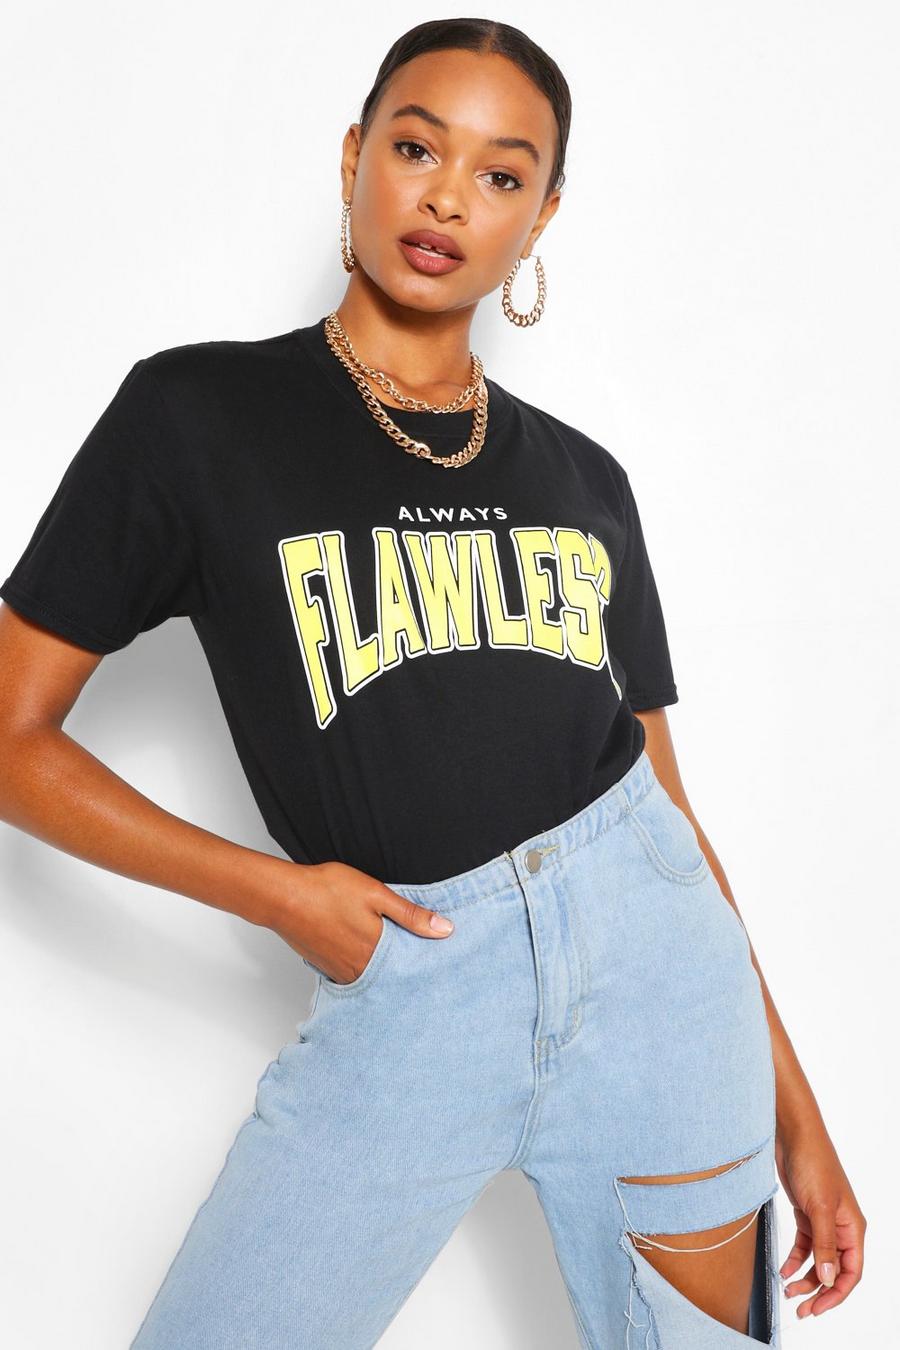 T-SHIRT CON SLOGAN “FLAWLESS” image number 1